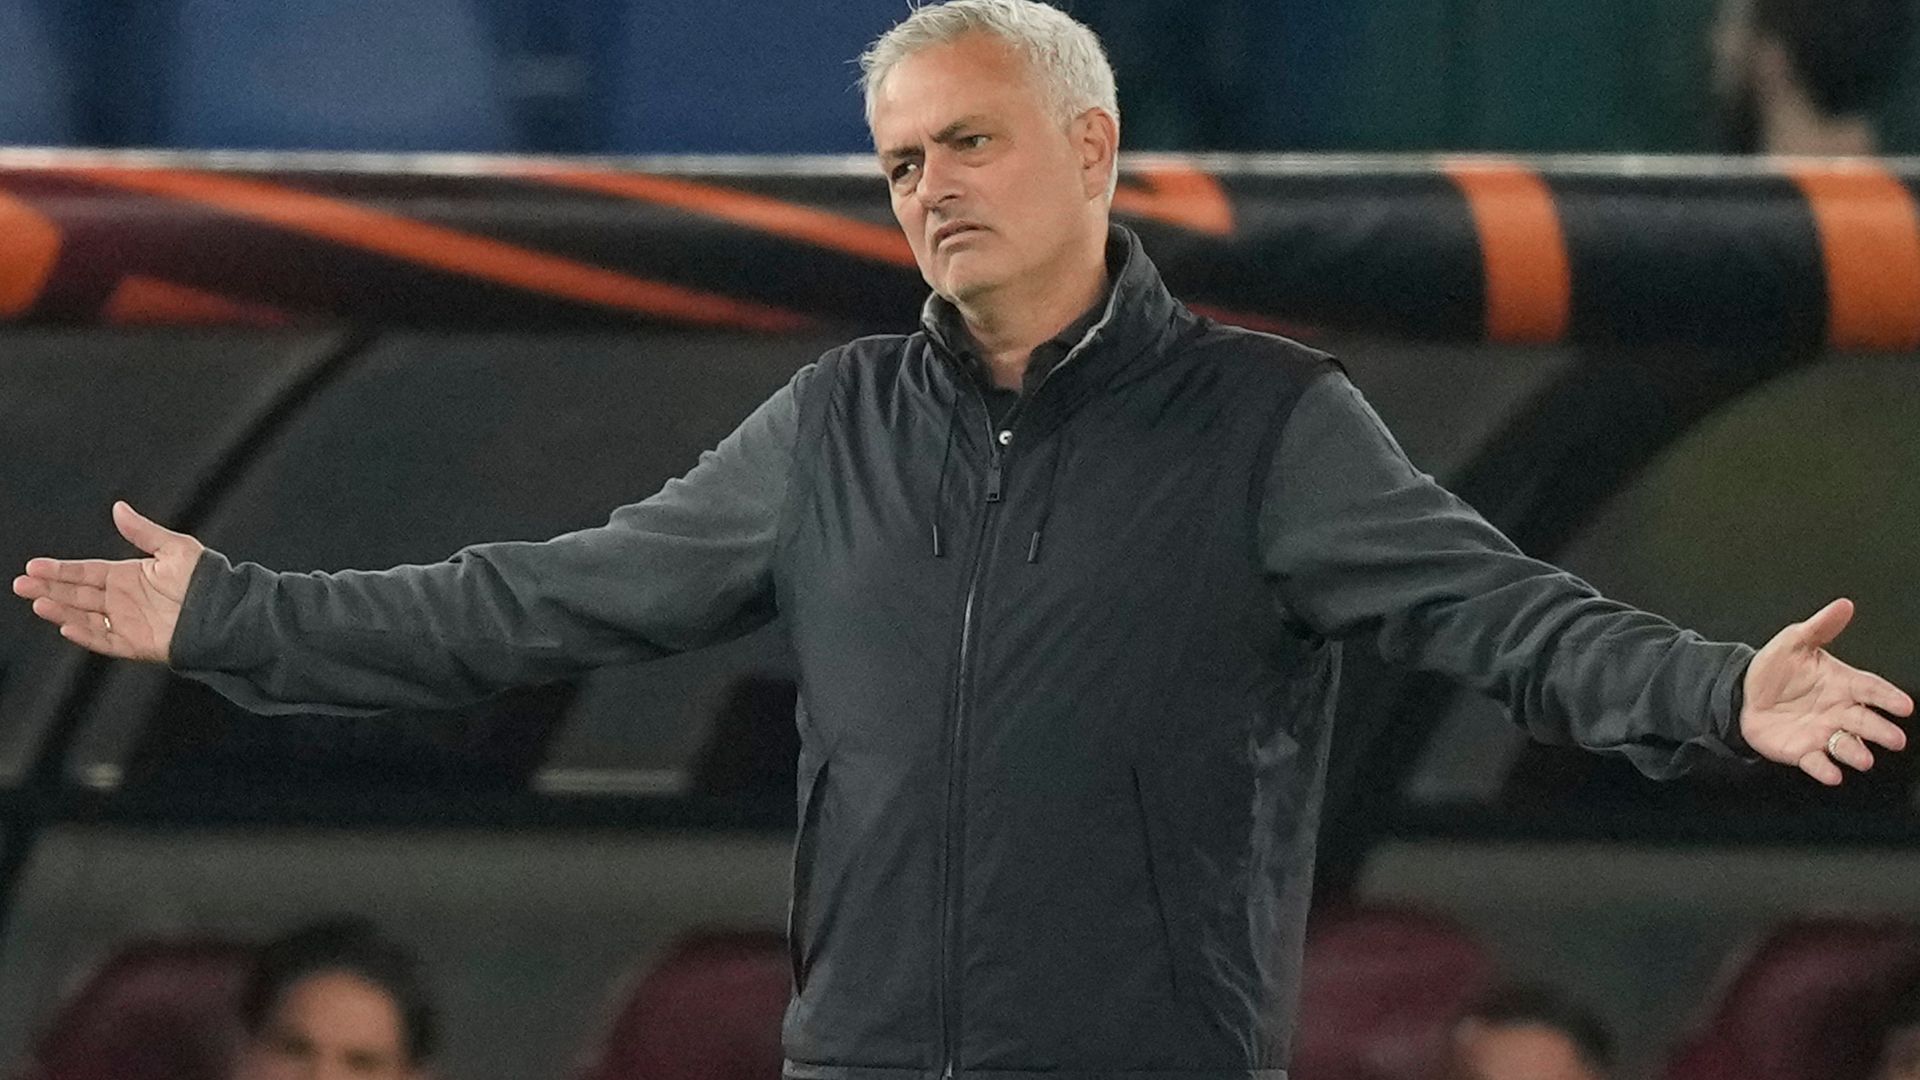 Euro round-up: Mourinho rages as Roma draw | Atletico lose again